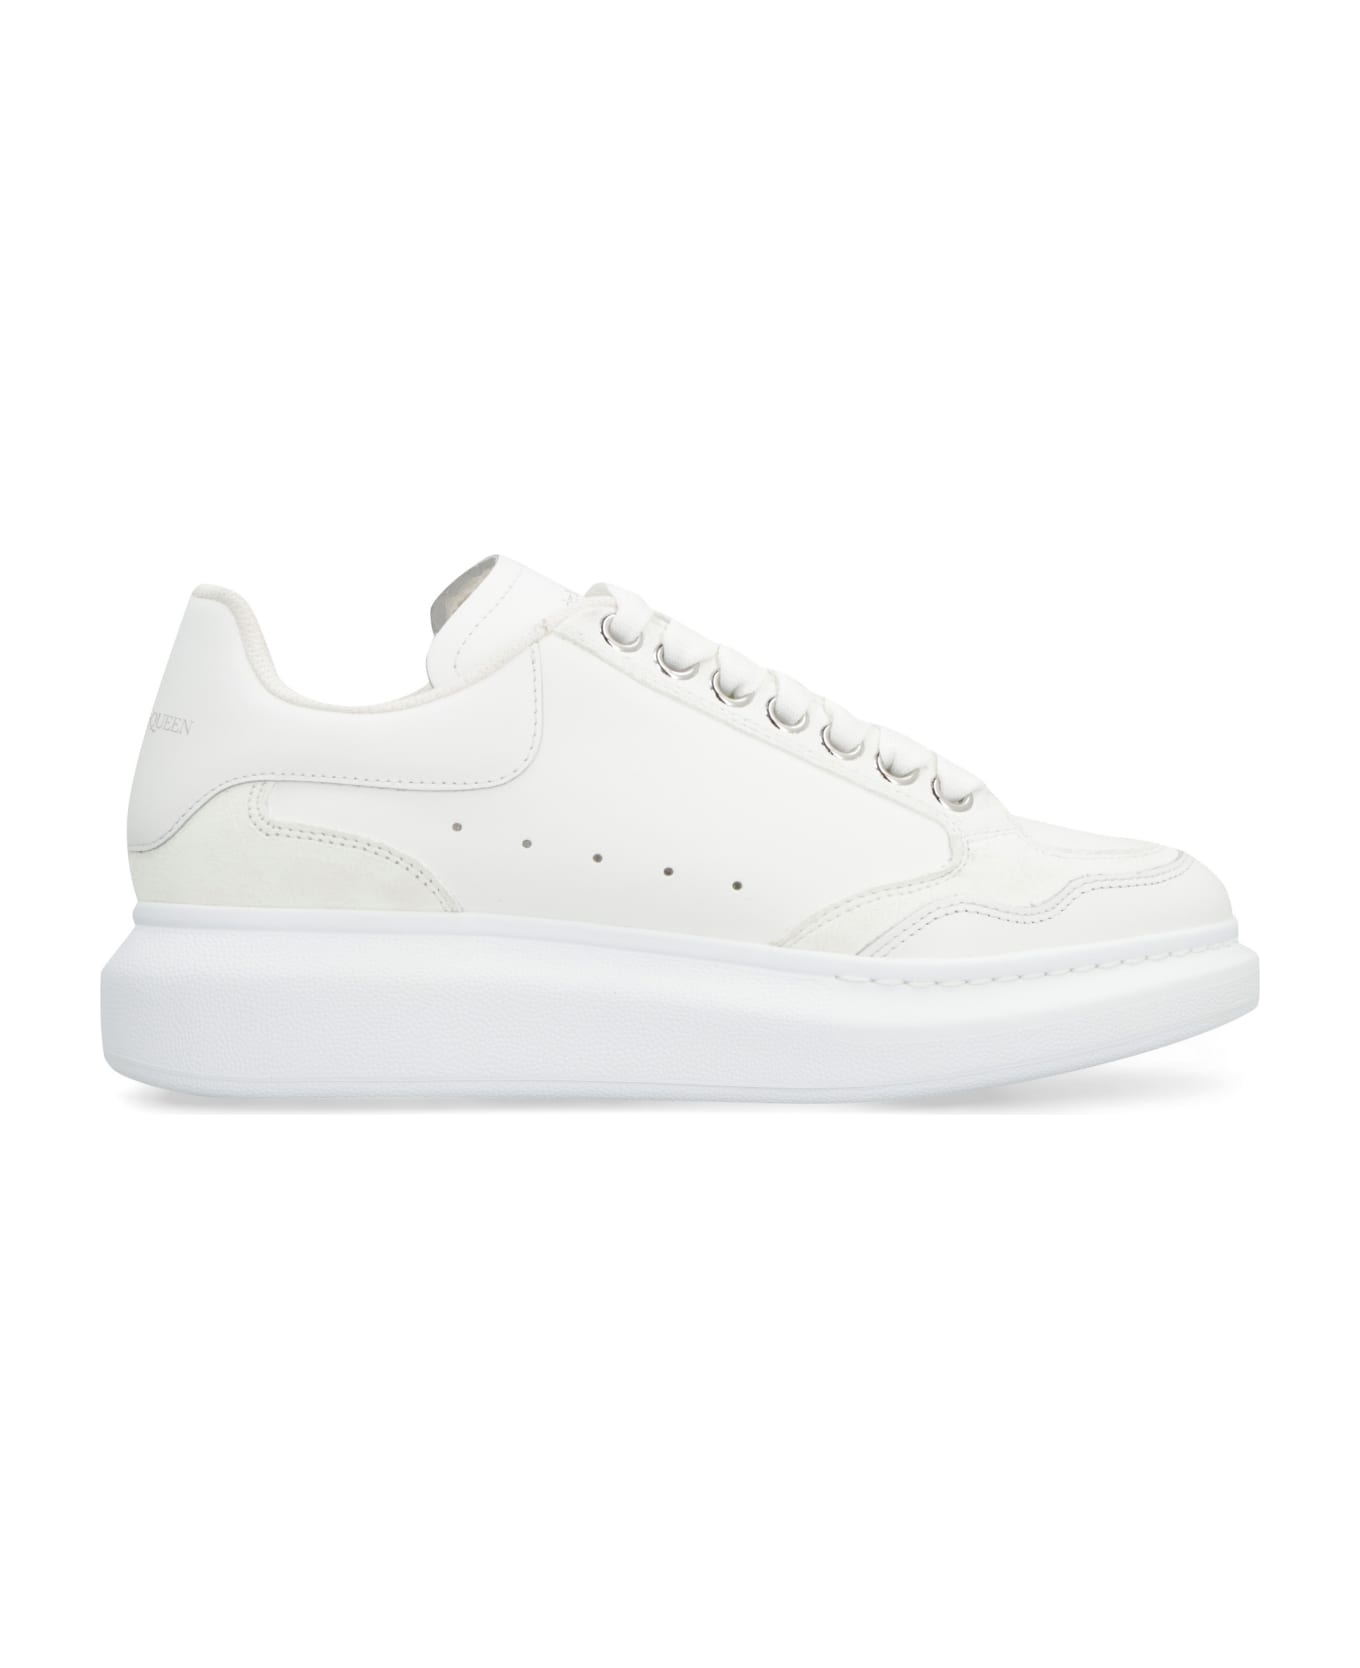 Alexander McQueen Larry Leather Low-top Sneakers - White